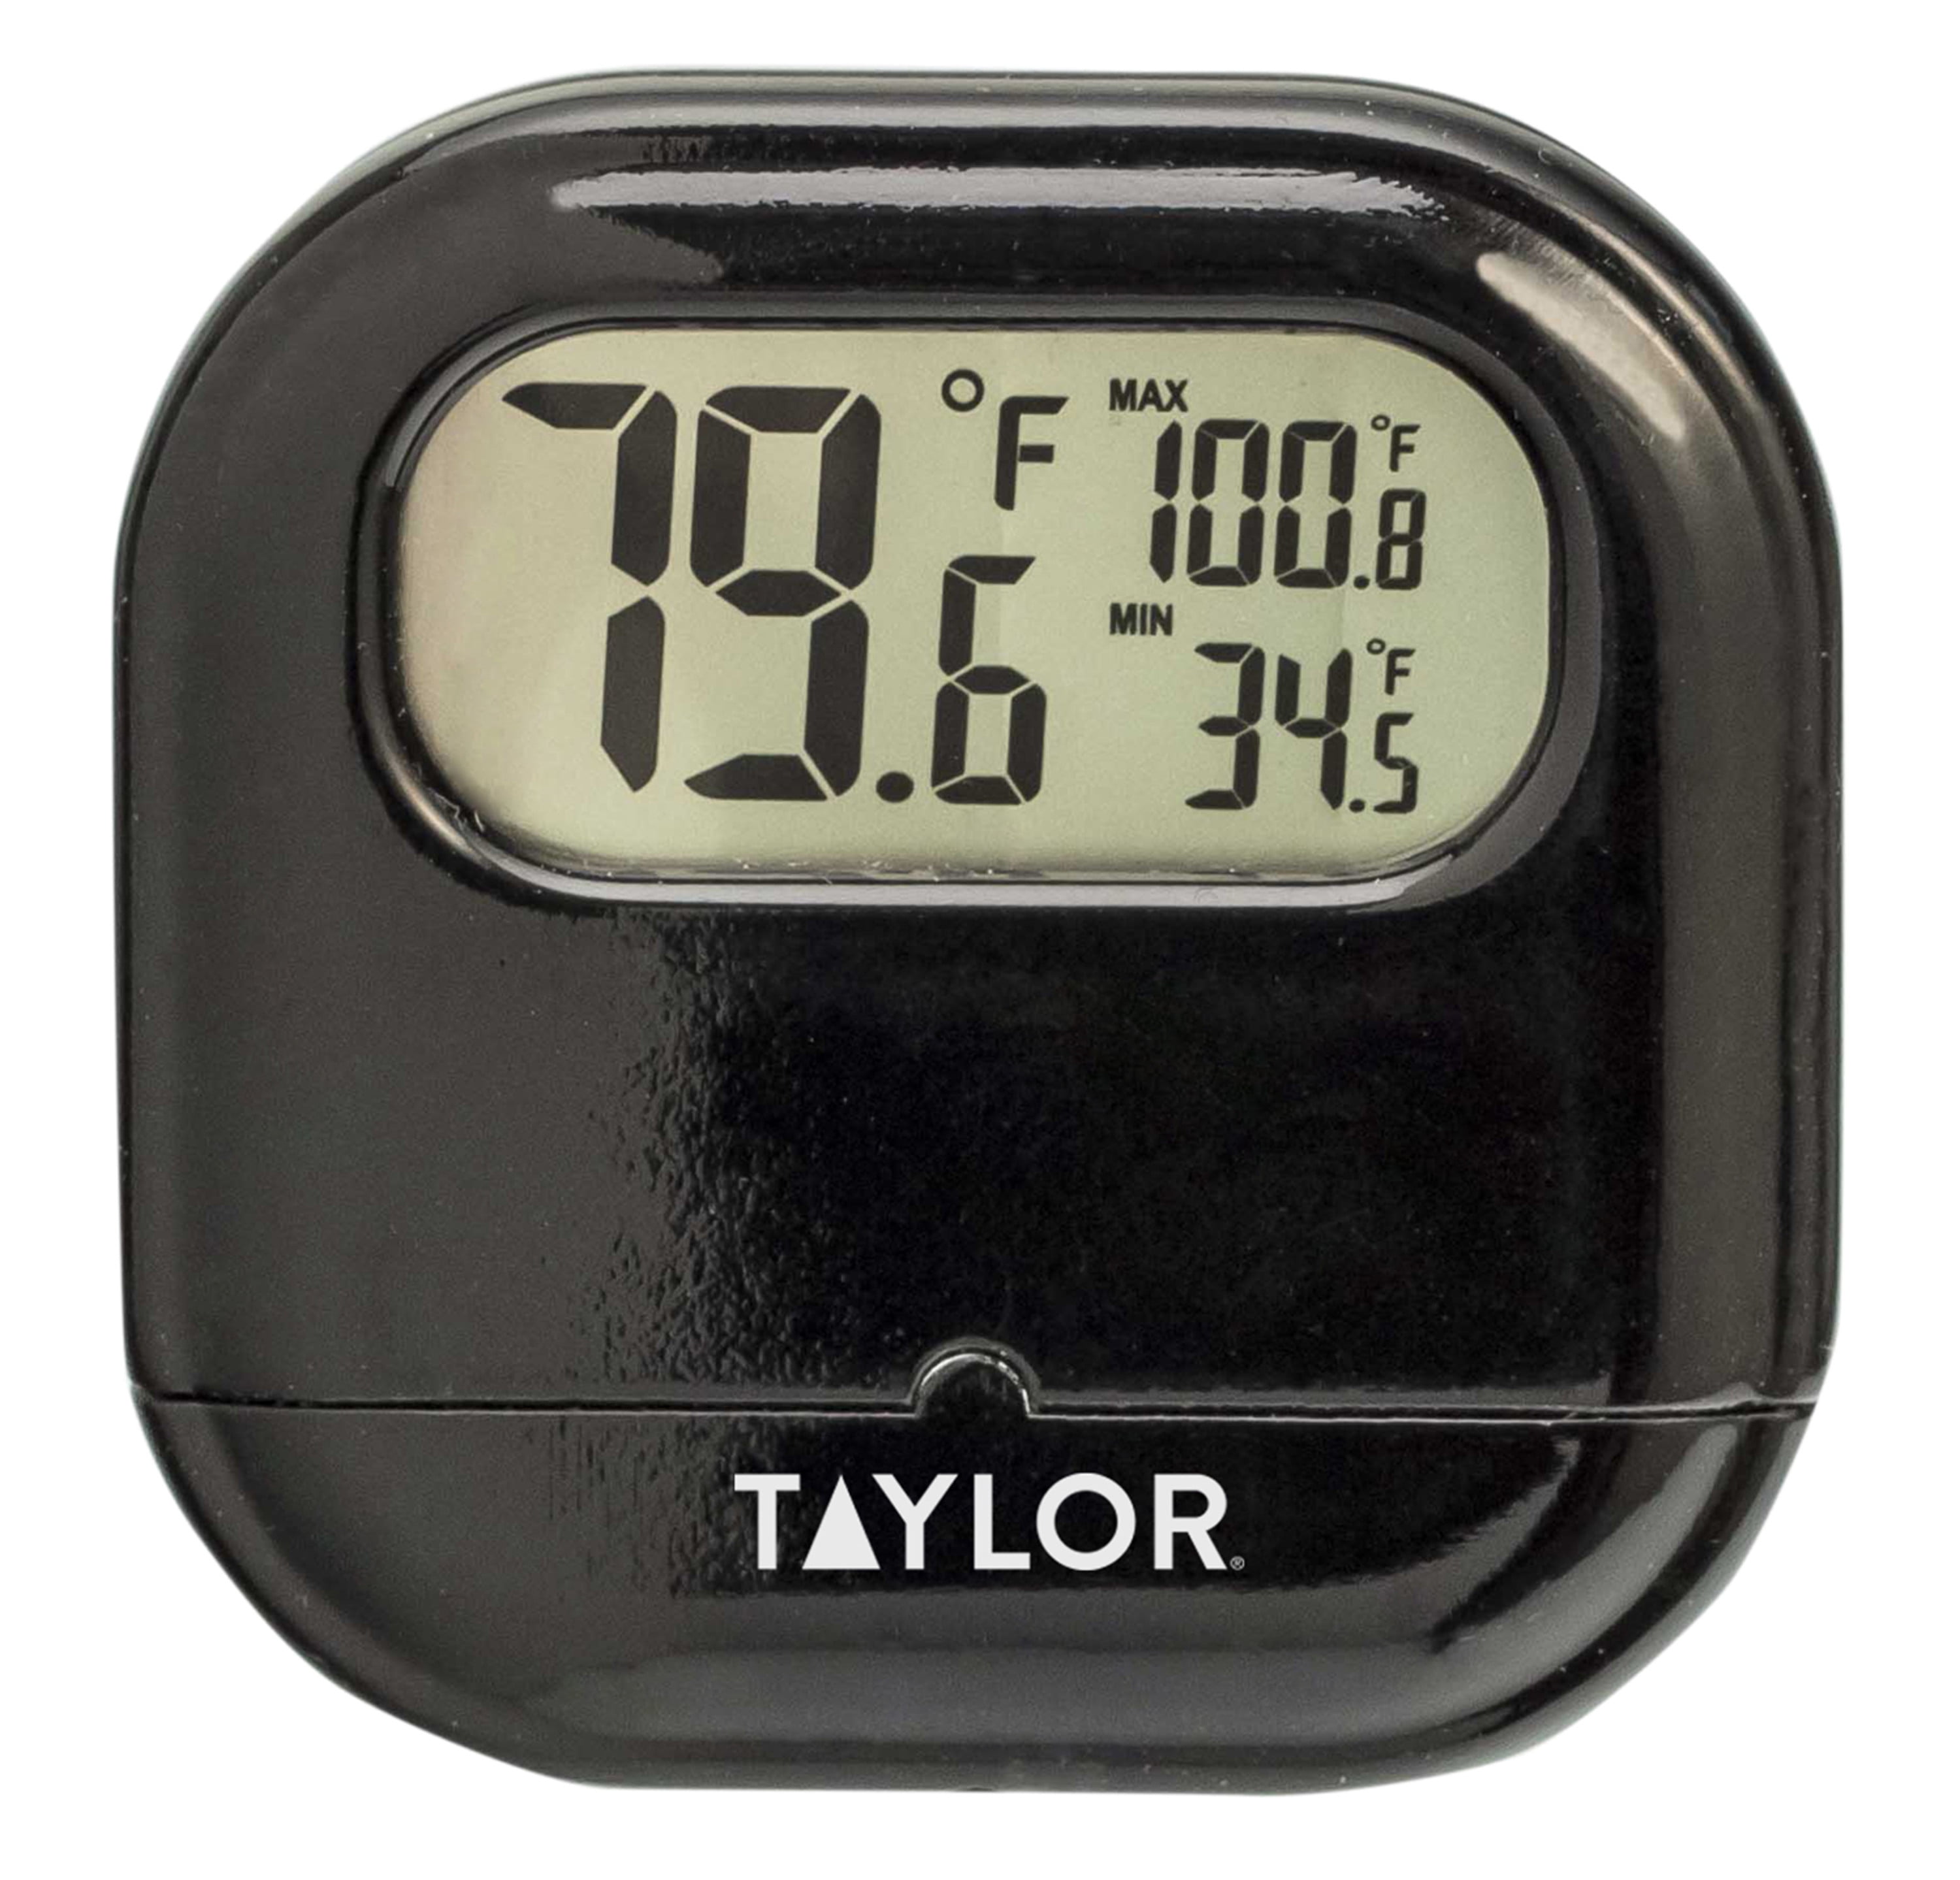 TAYLOR THERMOMETER 1508 DIGITAL WITH SUCTION CUP MOUNT 3.5"X1.5"X1" 